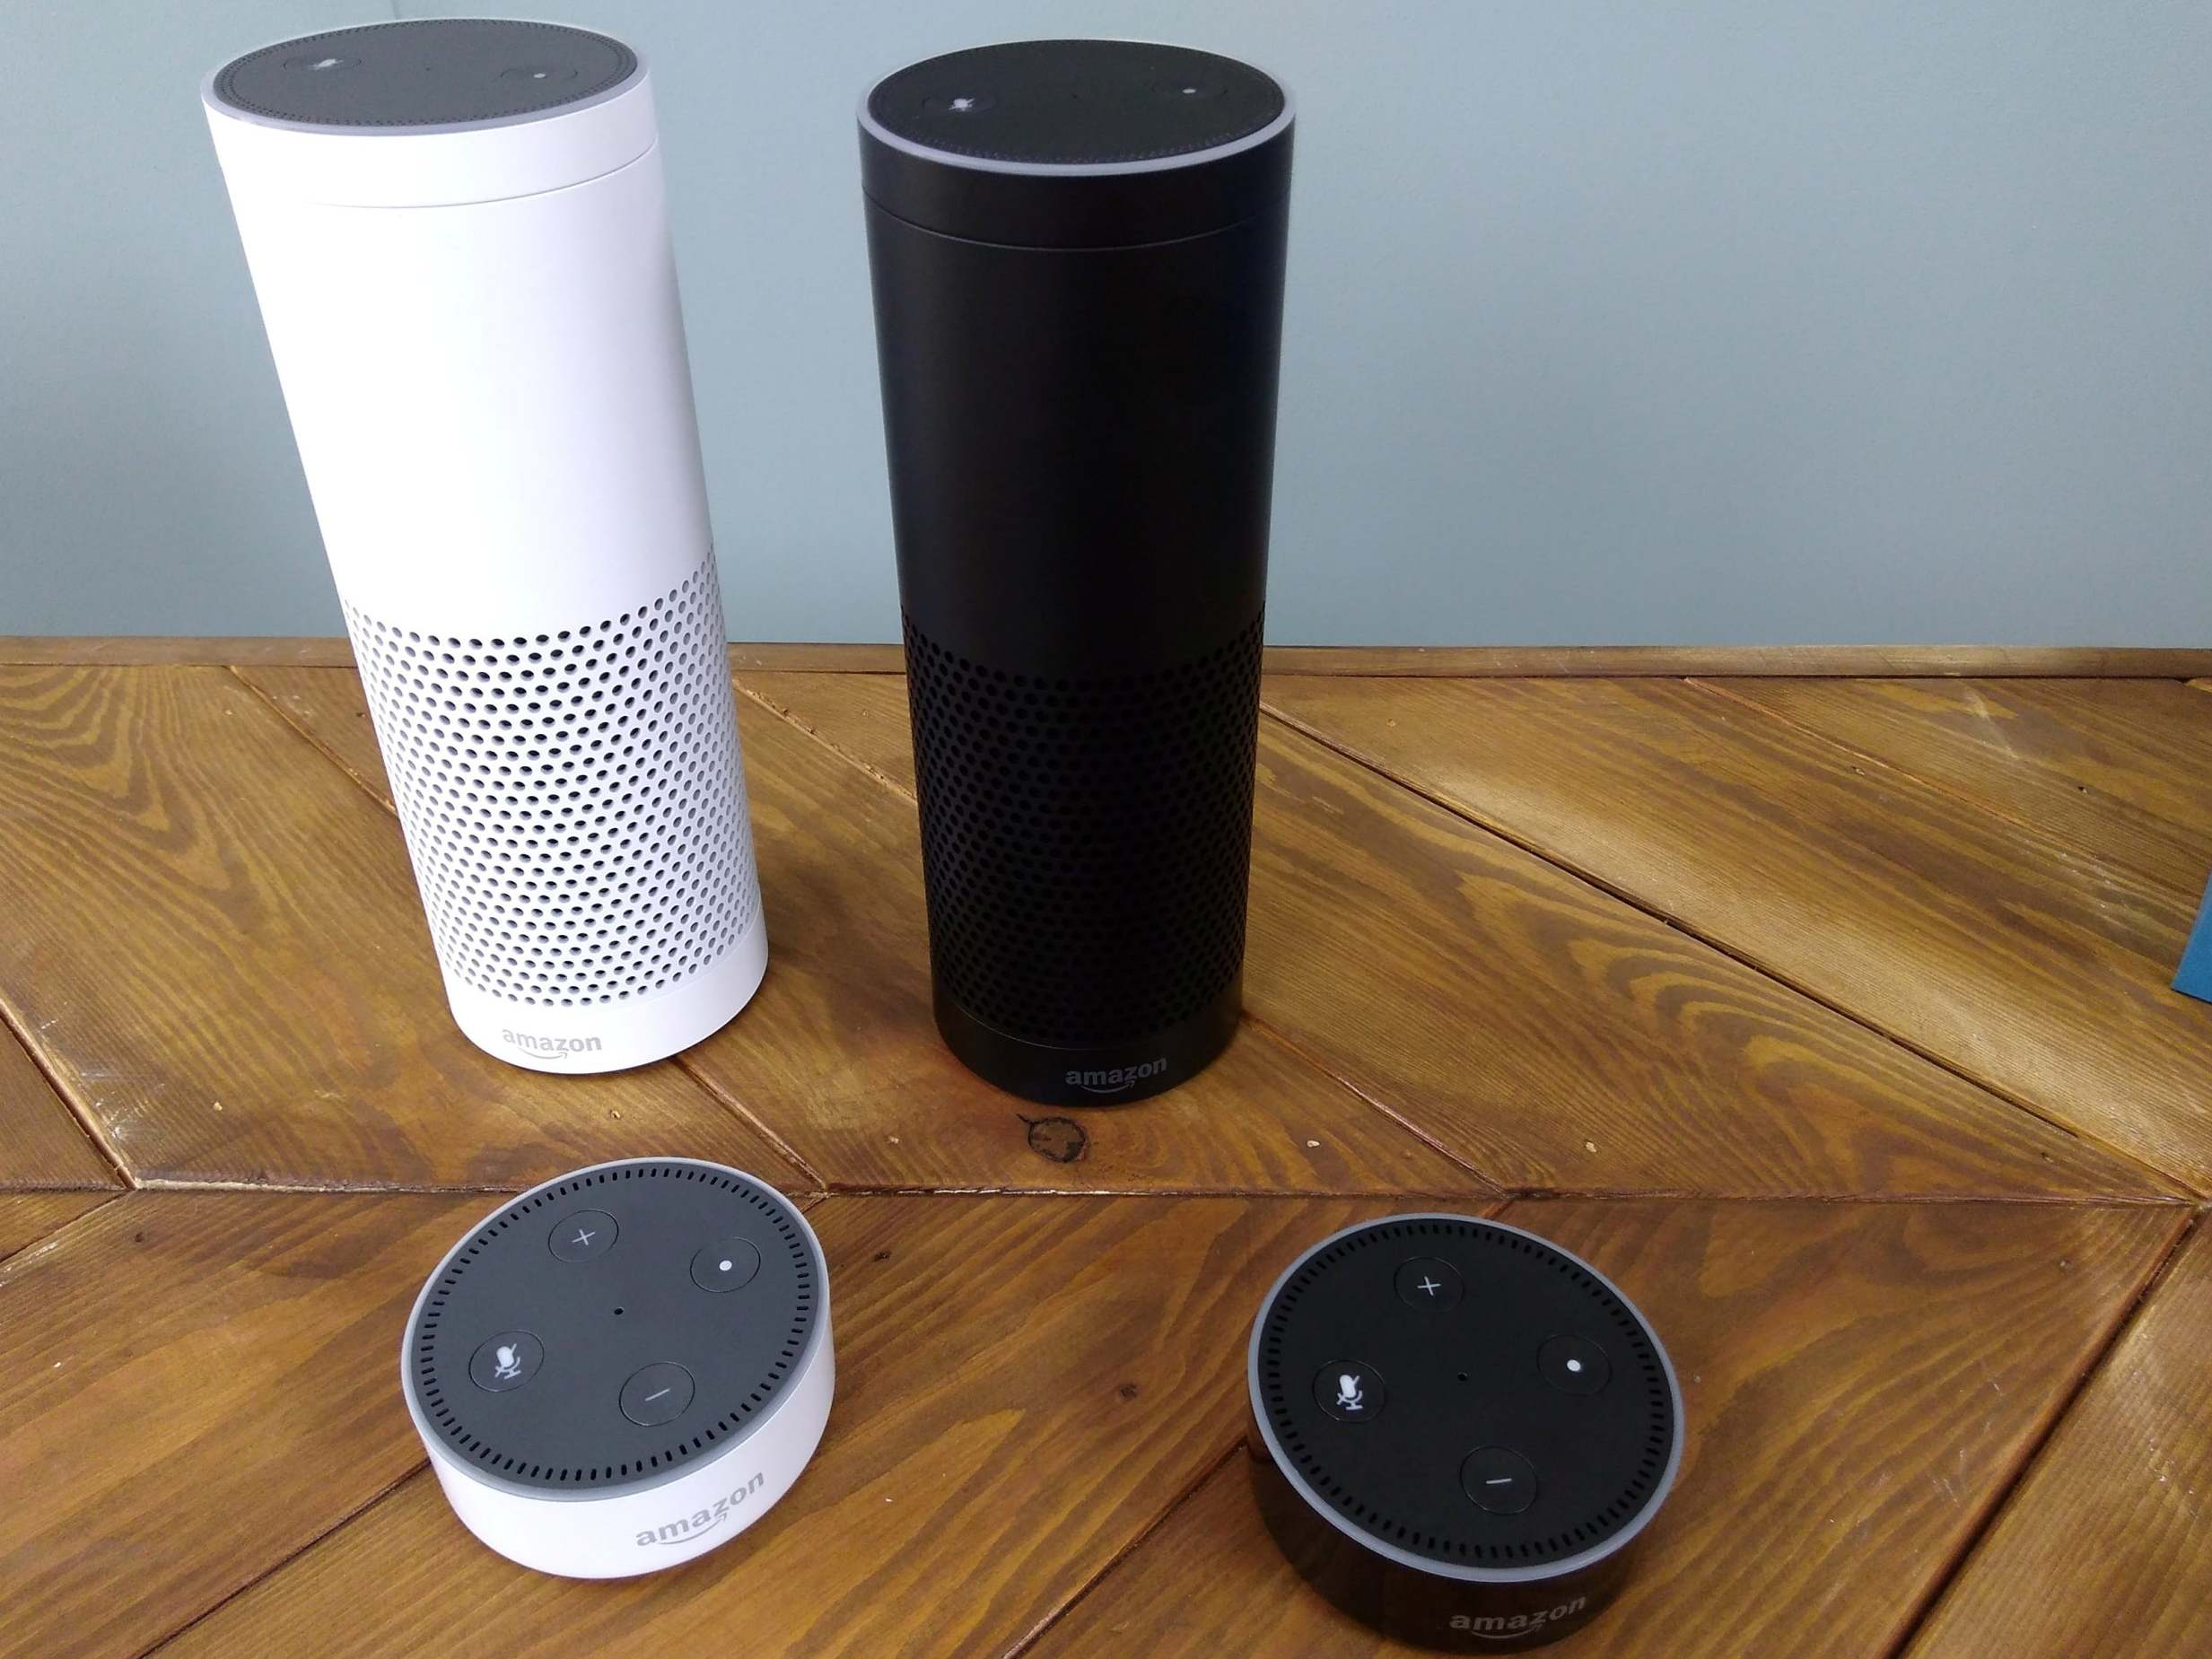 Amazon’s Echo devices send recordings to Amazon’s cloud service in order to respond to requests